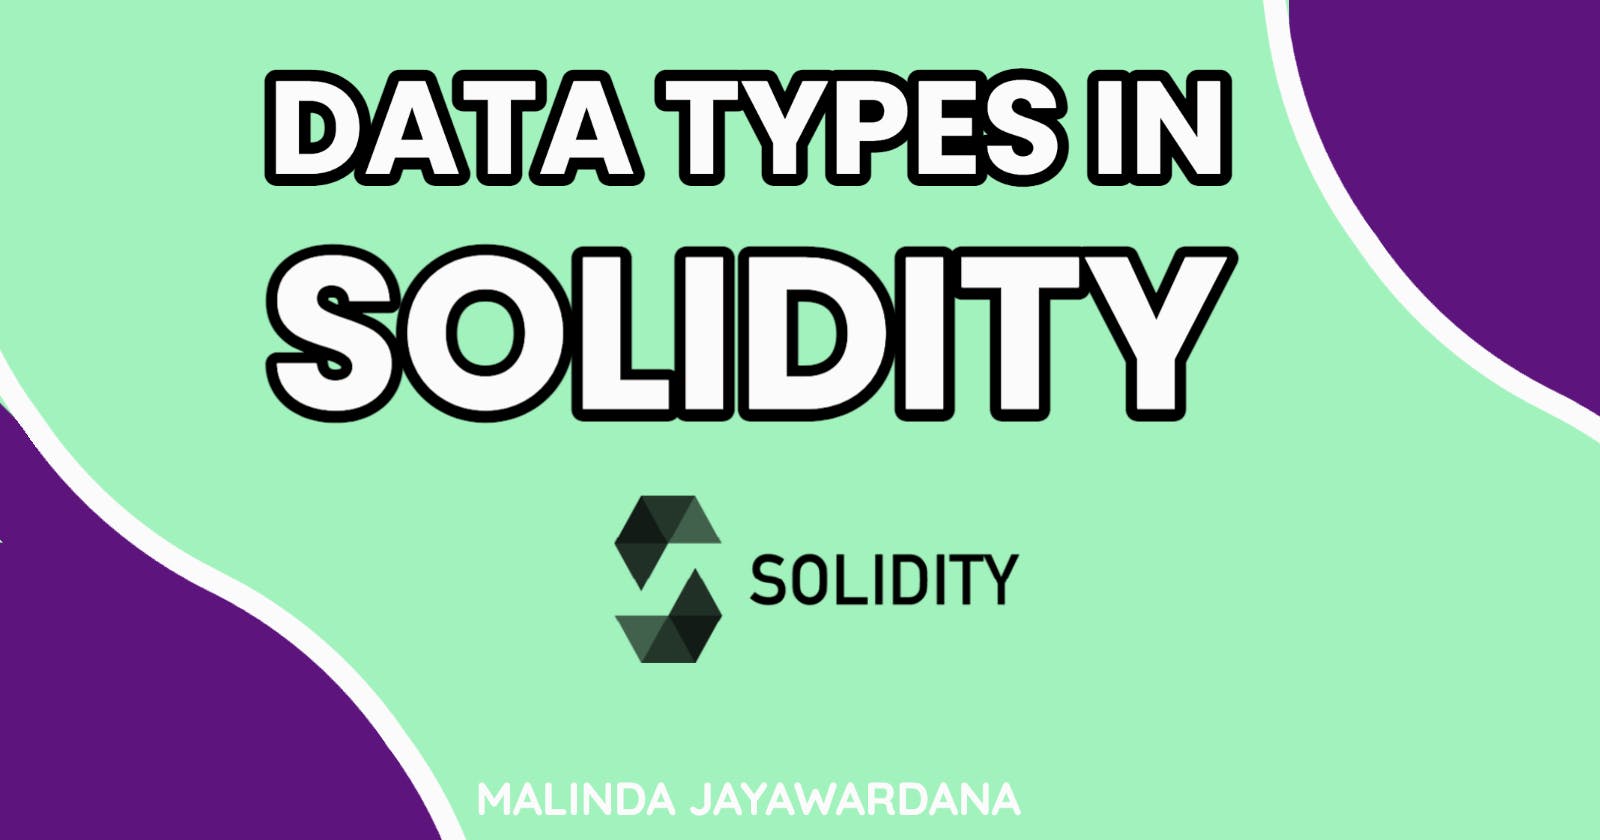 Data types in Solidity